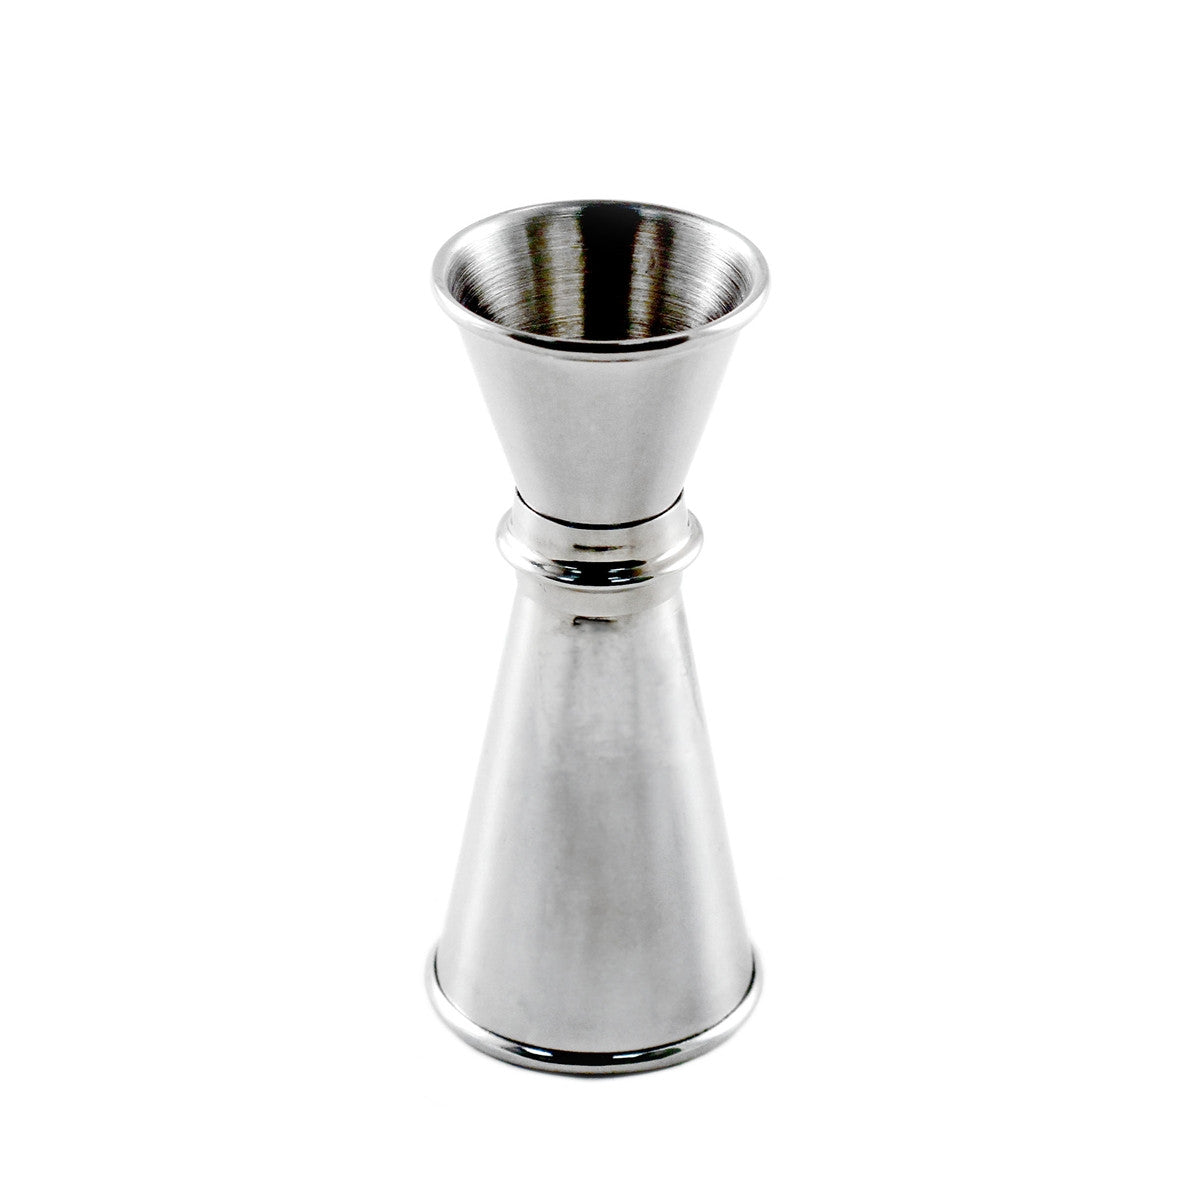 Barfly Japanese Style Jigger - 1 oz / 2 oz Stainless Steel